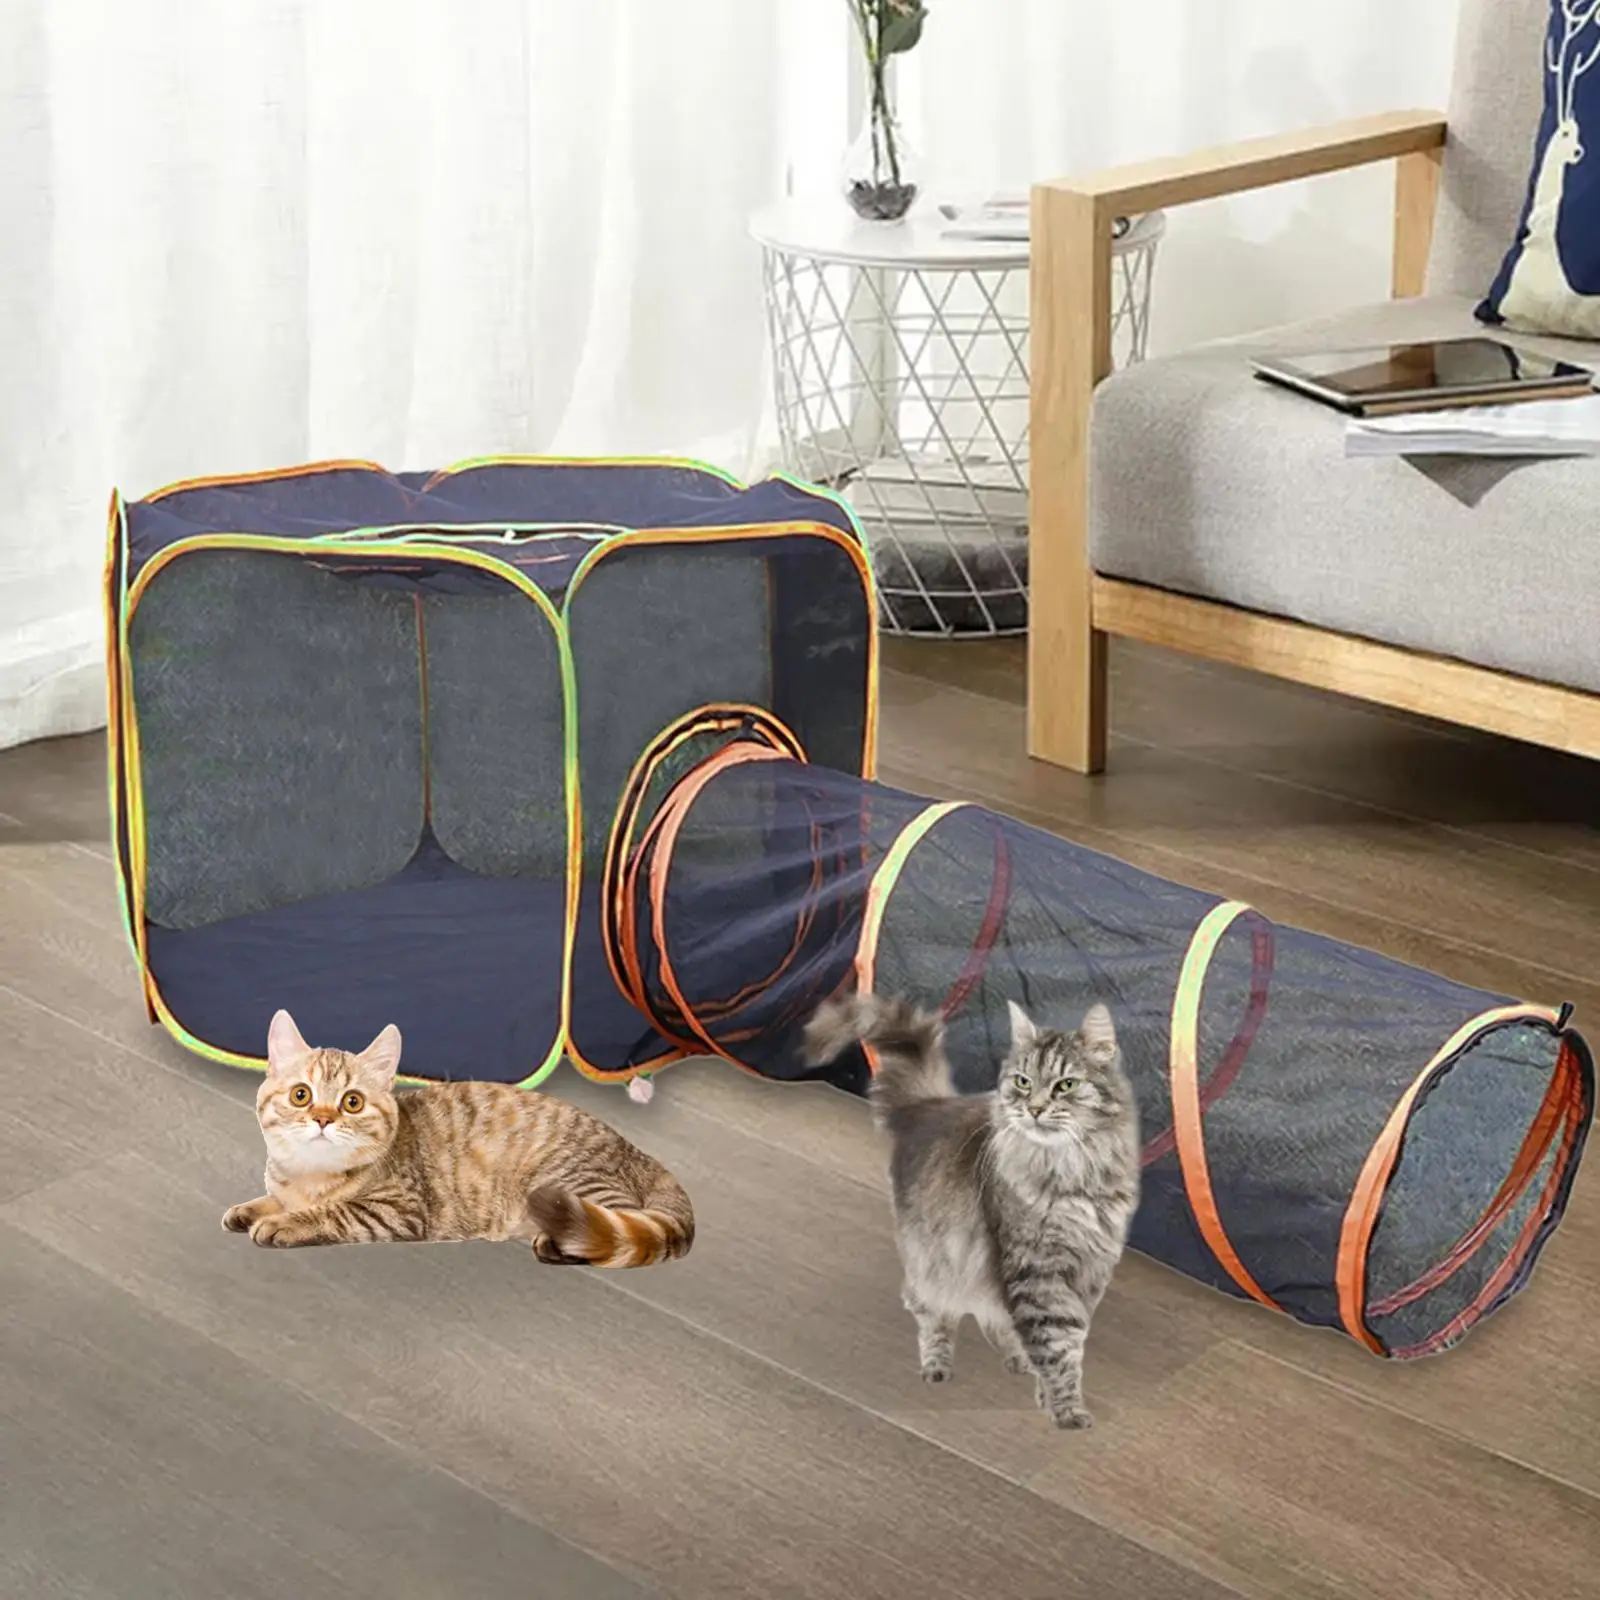 Playhouse Cats Cube Portable Outdoor Indoor Playground Cat Enclosures Cat Tent Tunnel Pet Playpen for Rest Dog Ferrets Small Pet